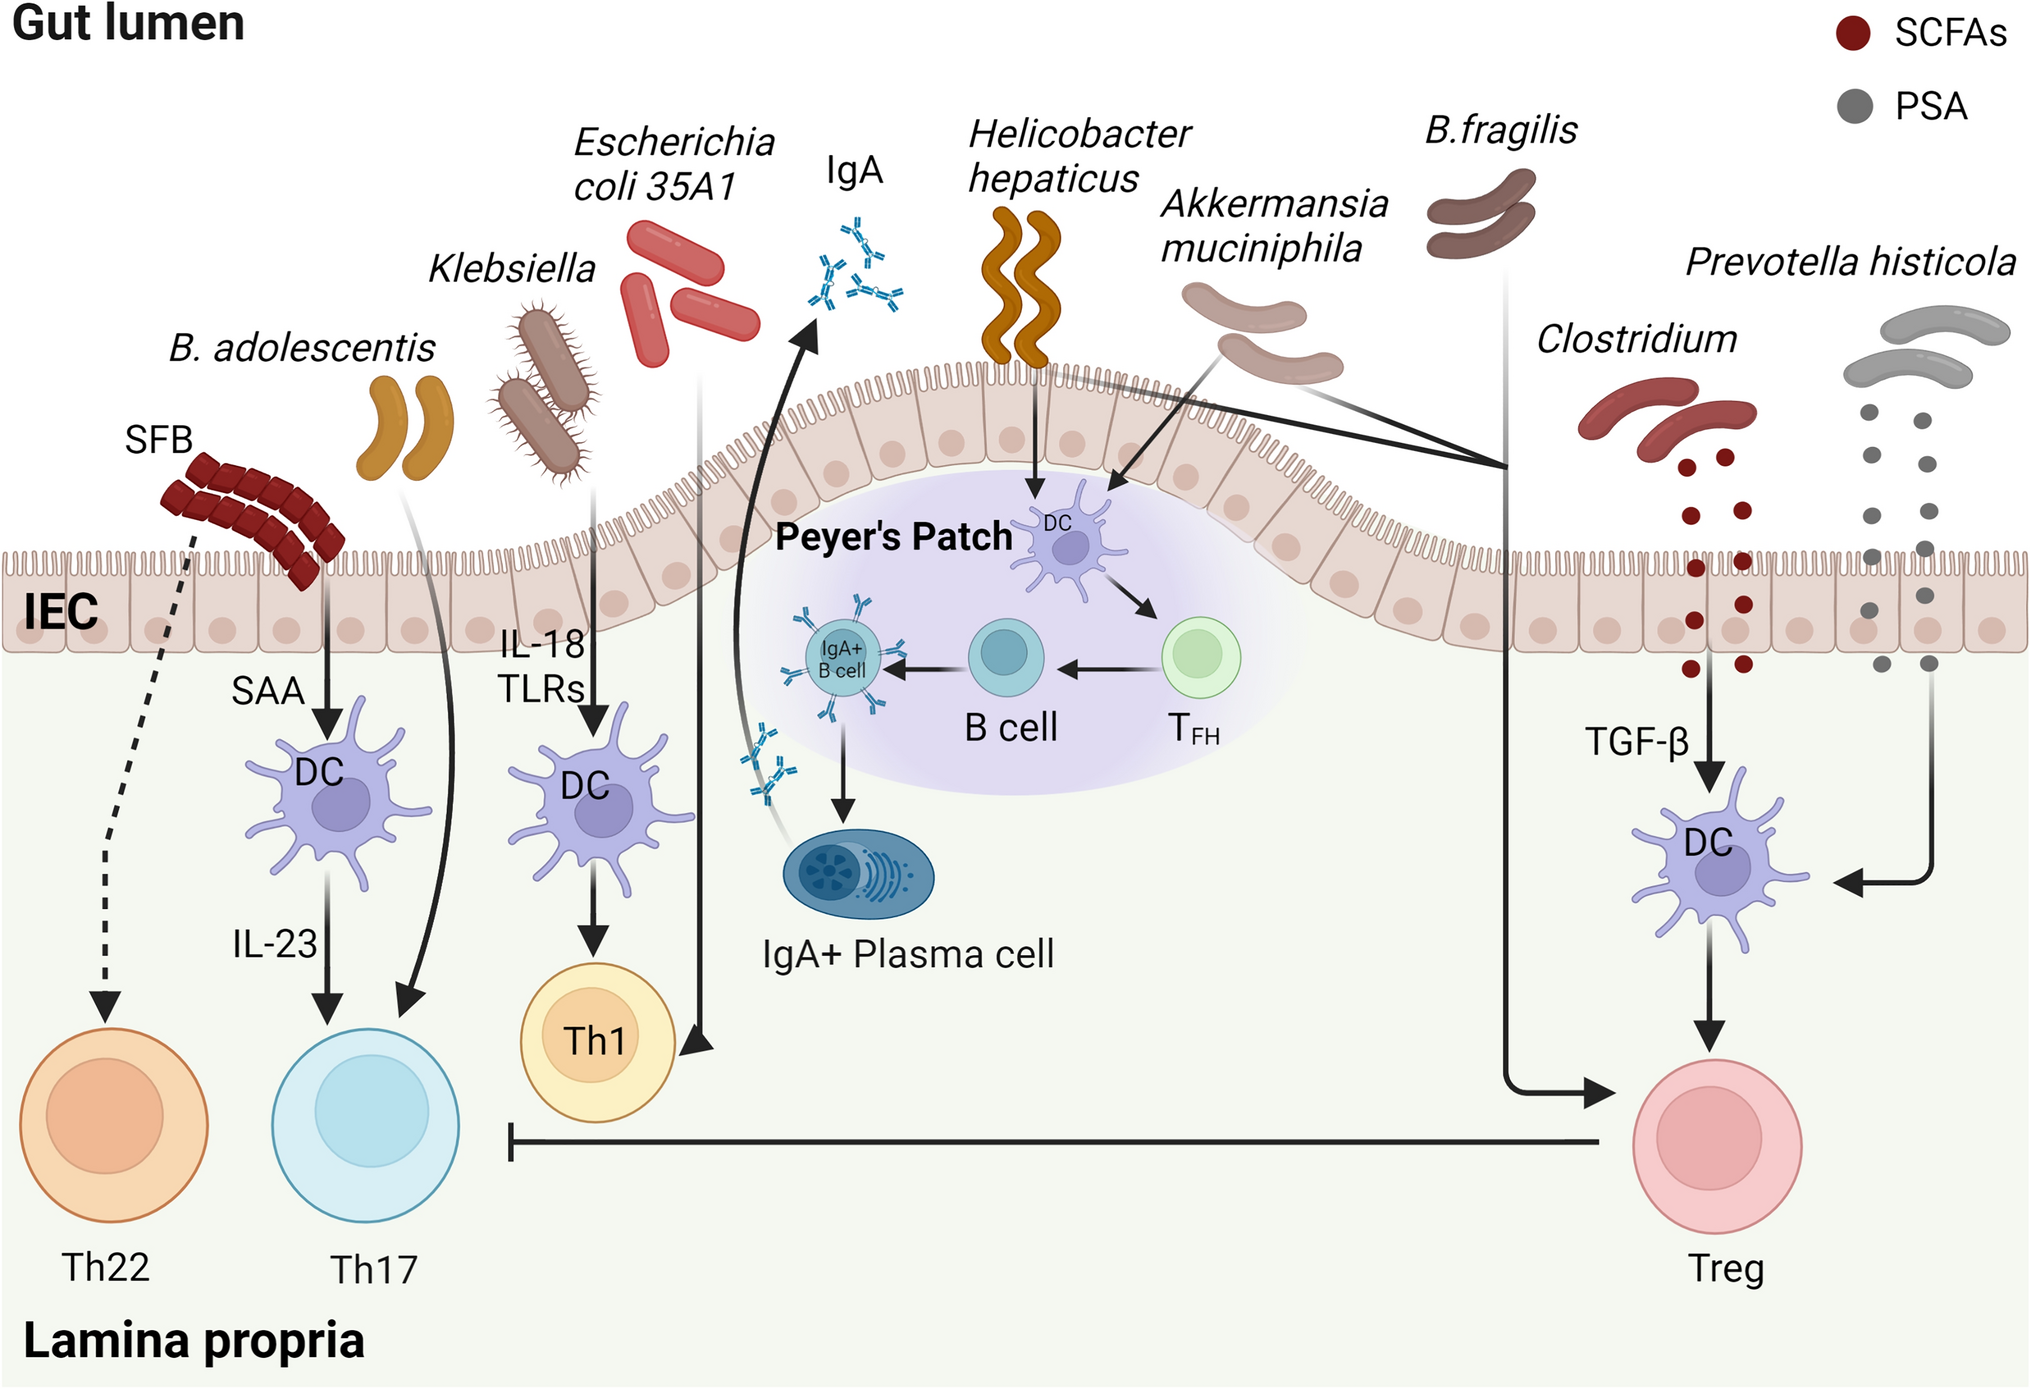 Targeting gut microbiota for immunotherapy of diseases